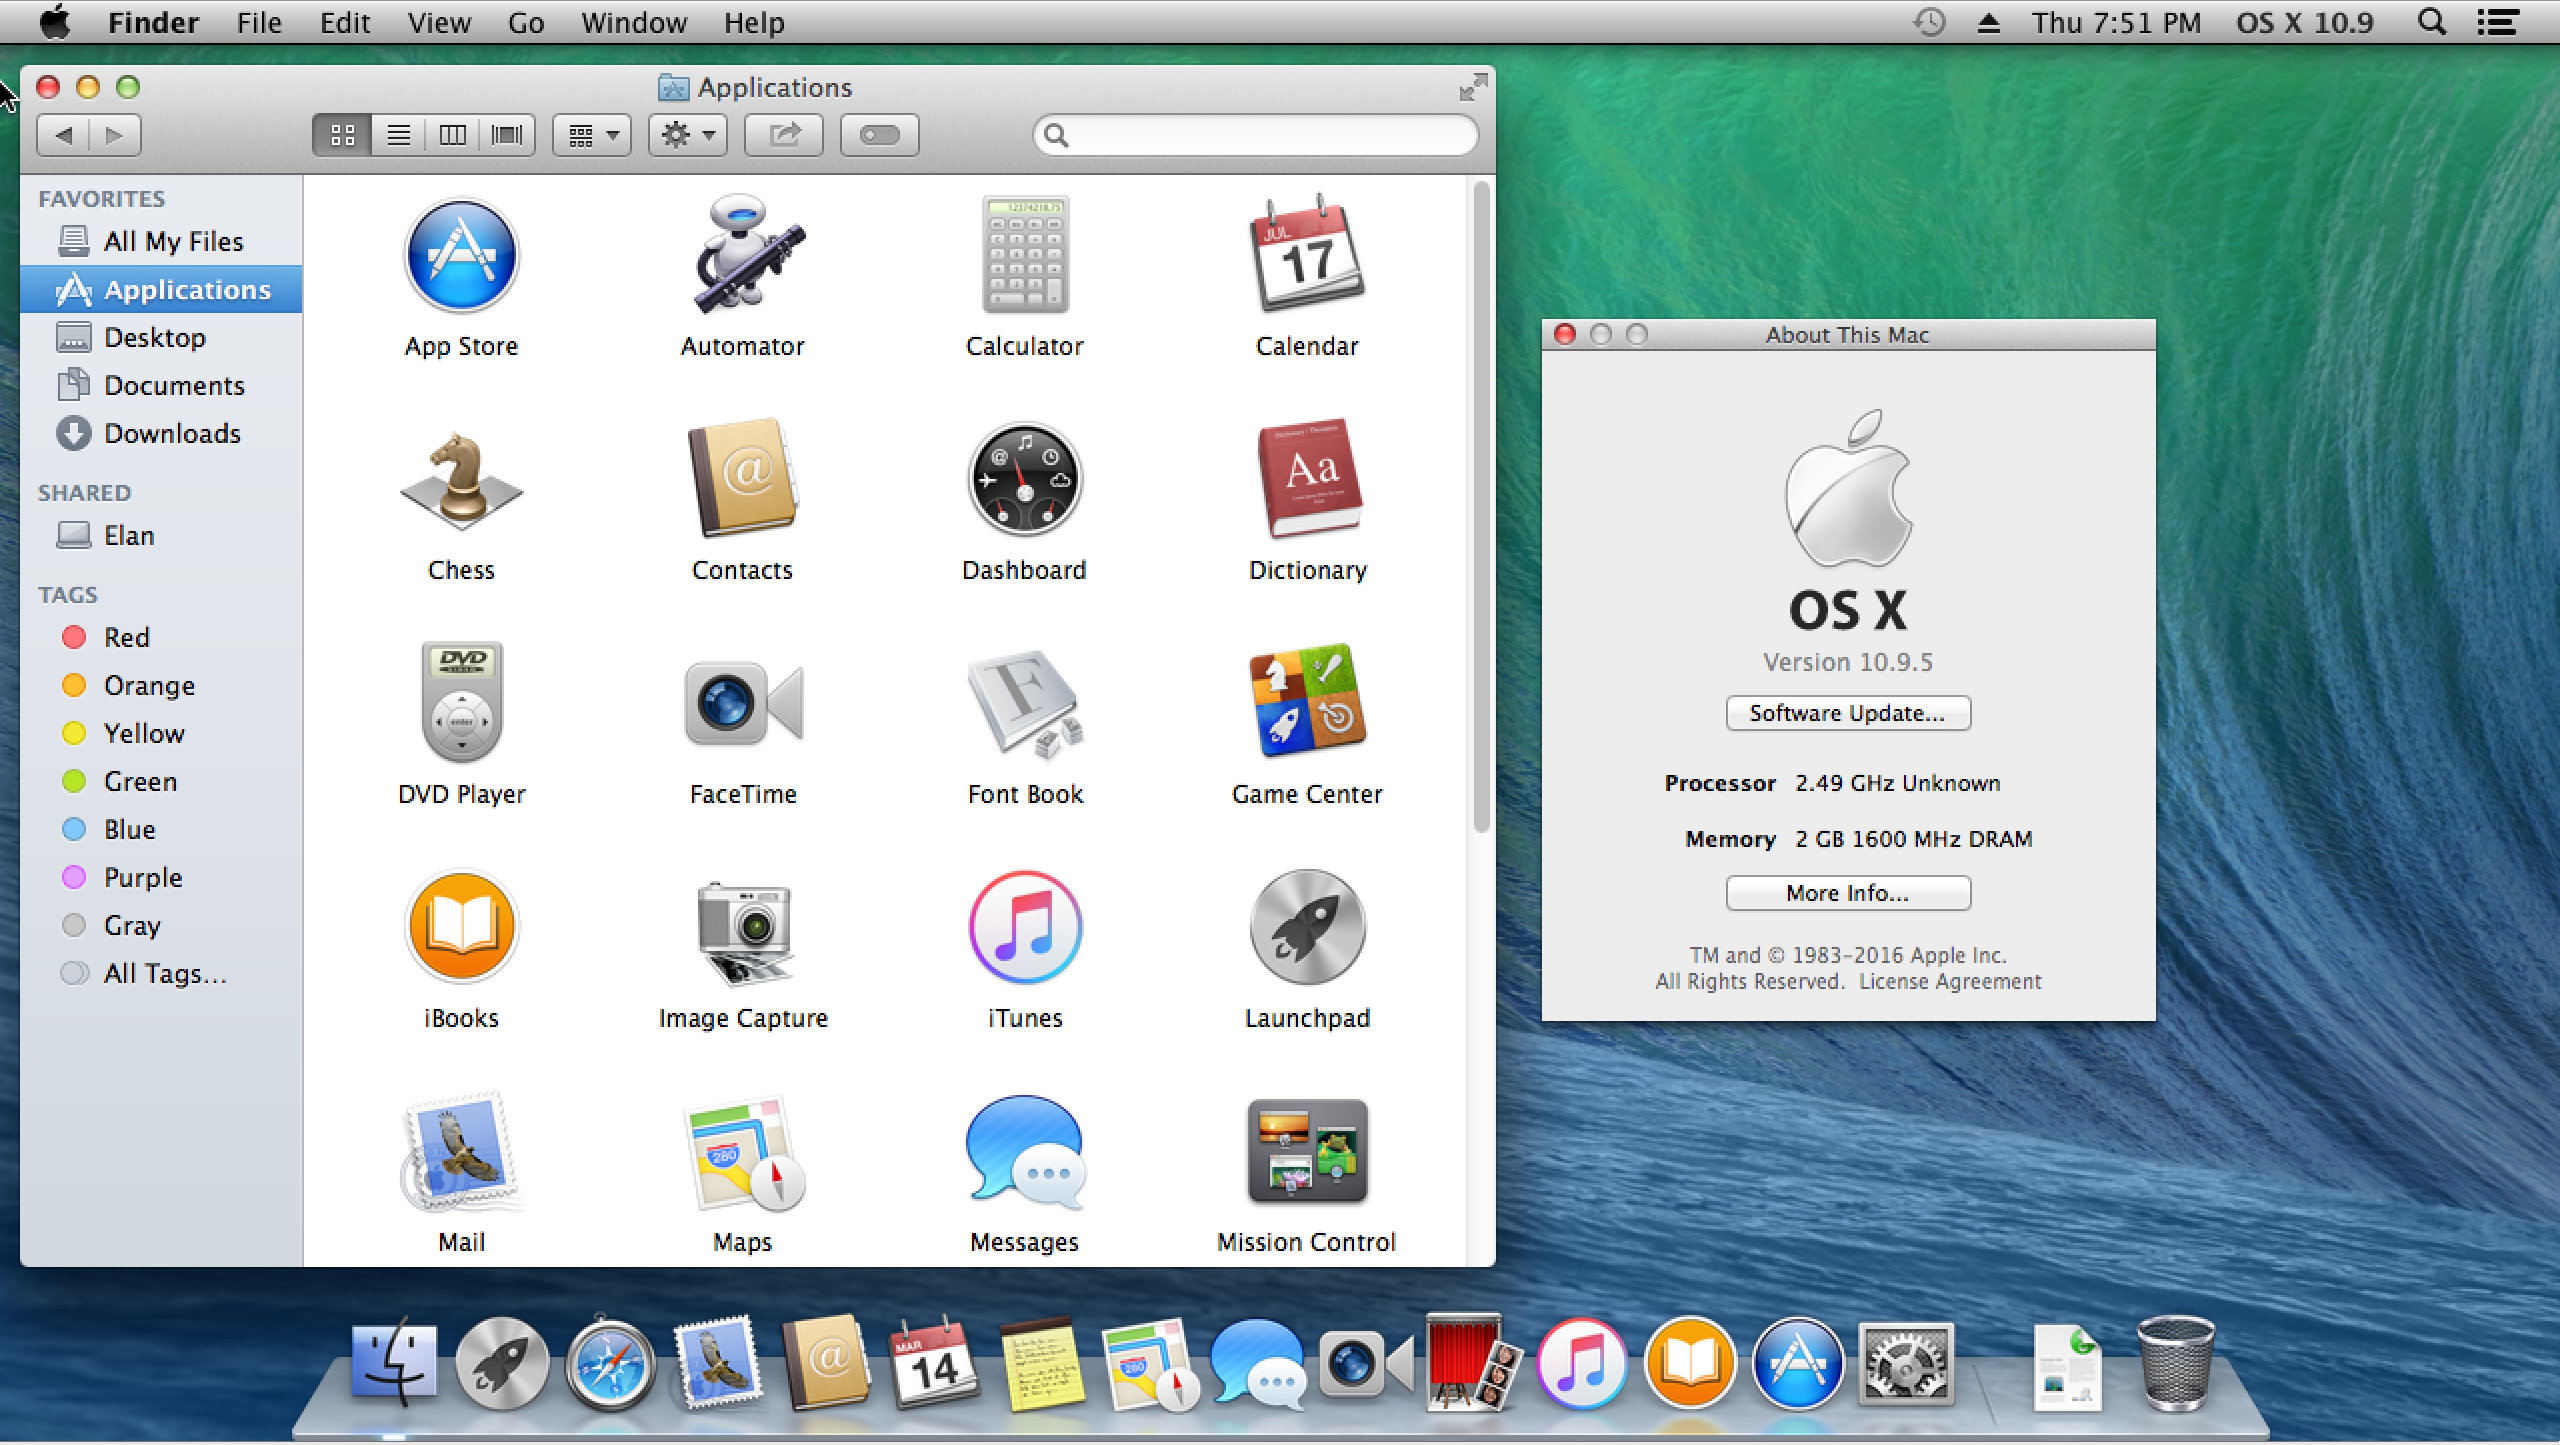 how to update my mac os x from 10.8.5 to 10.9